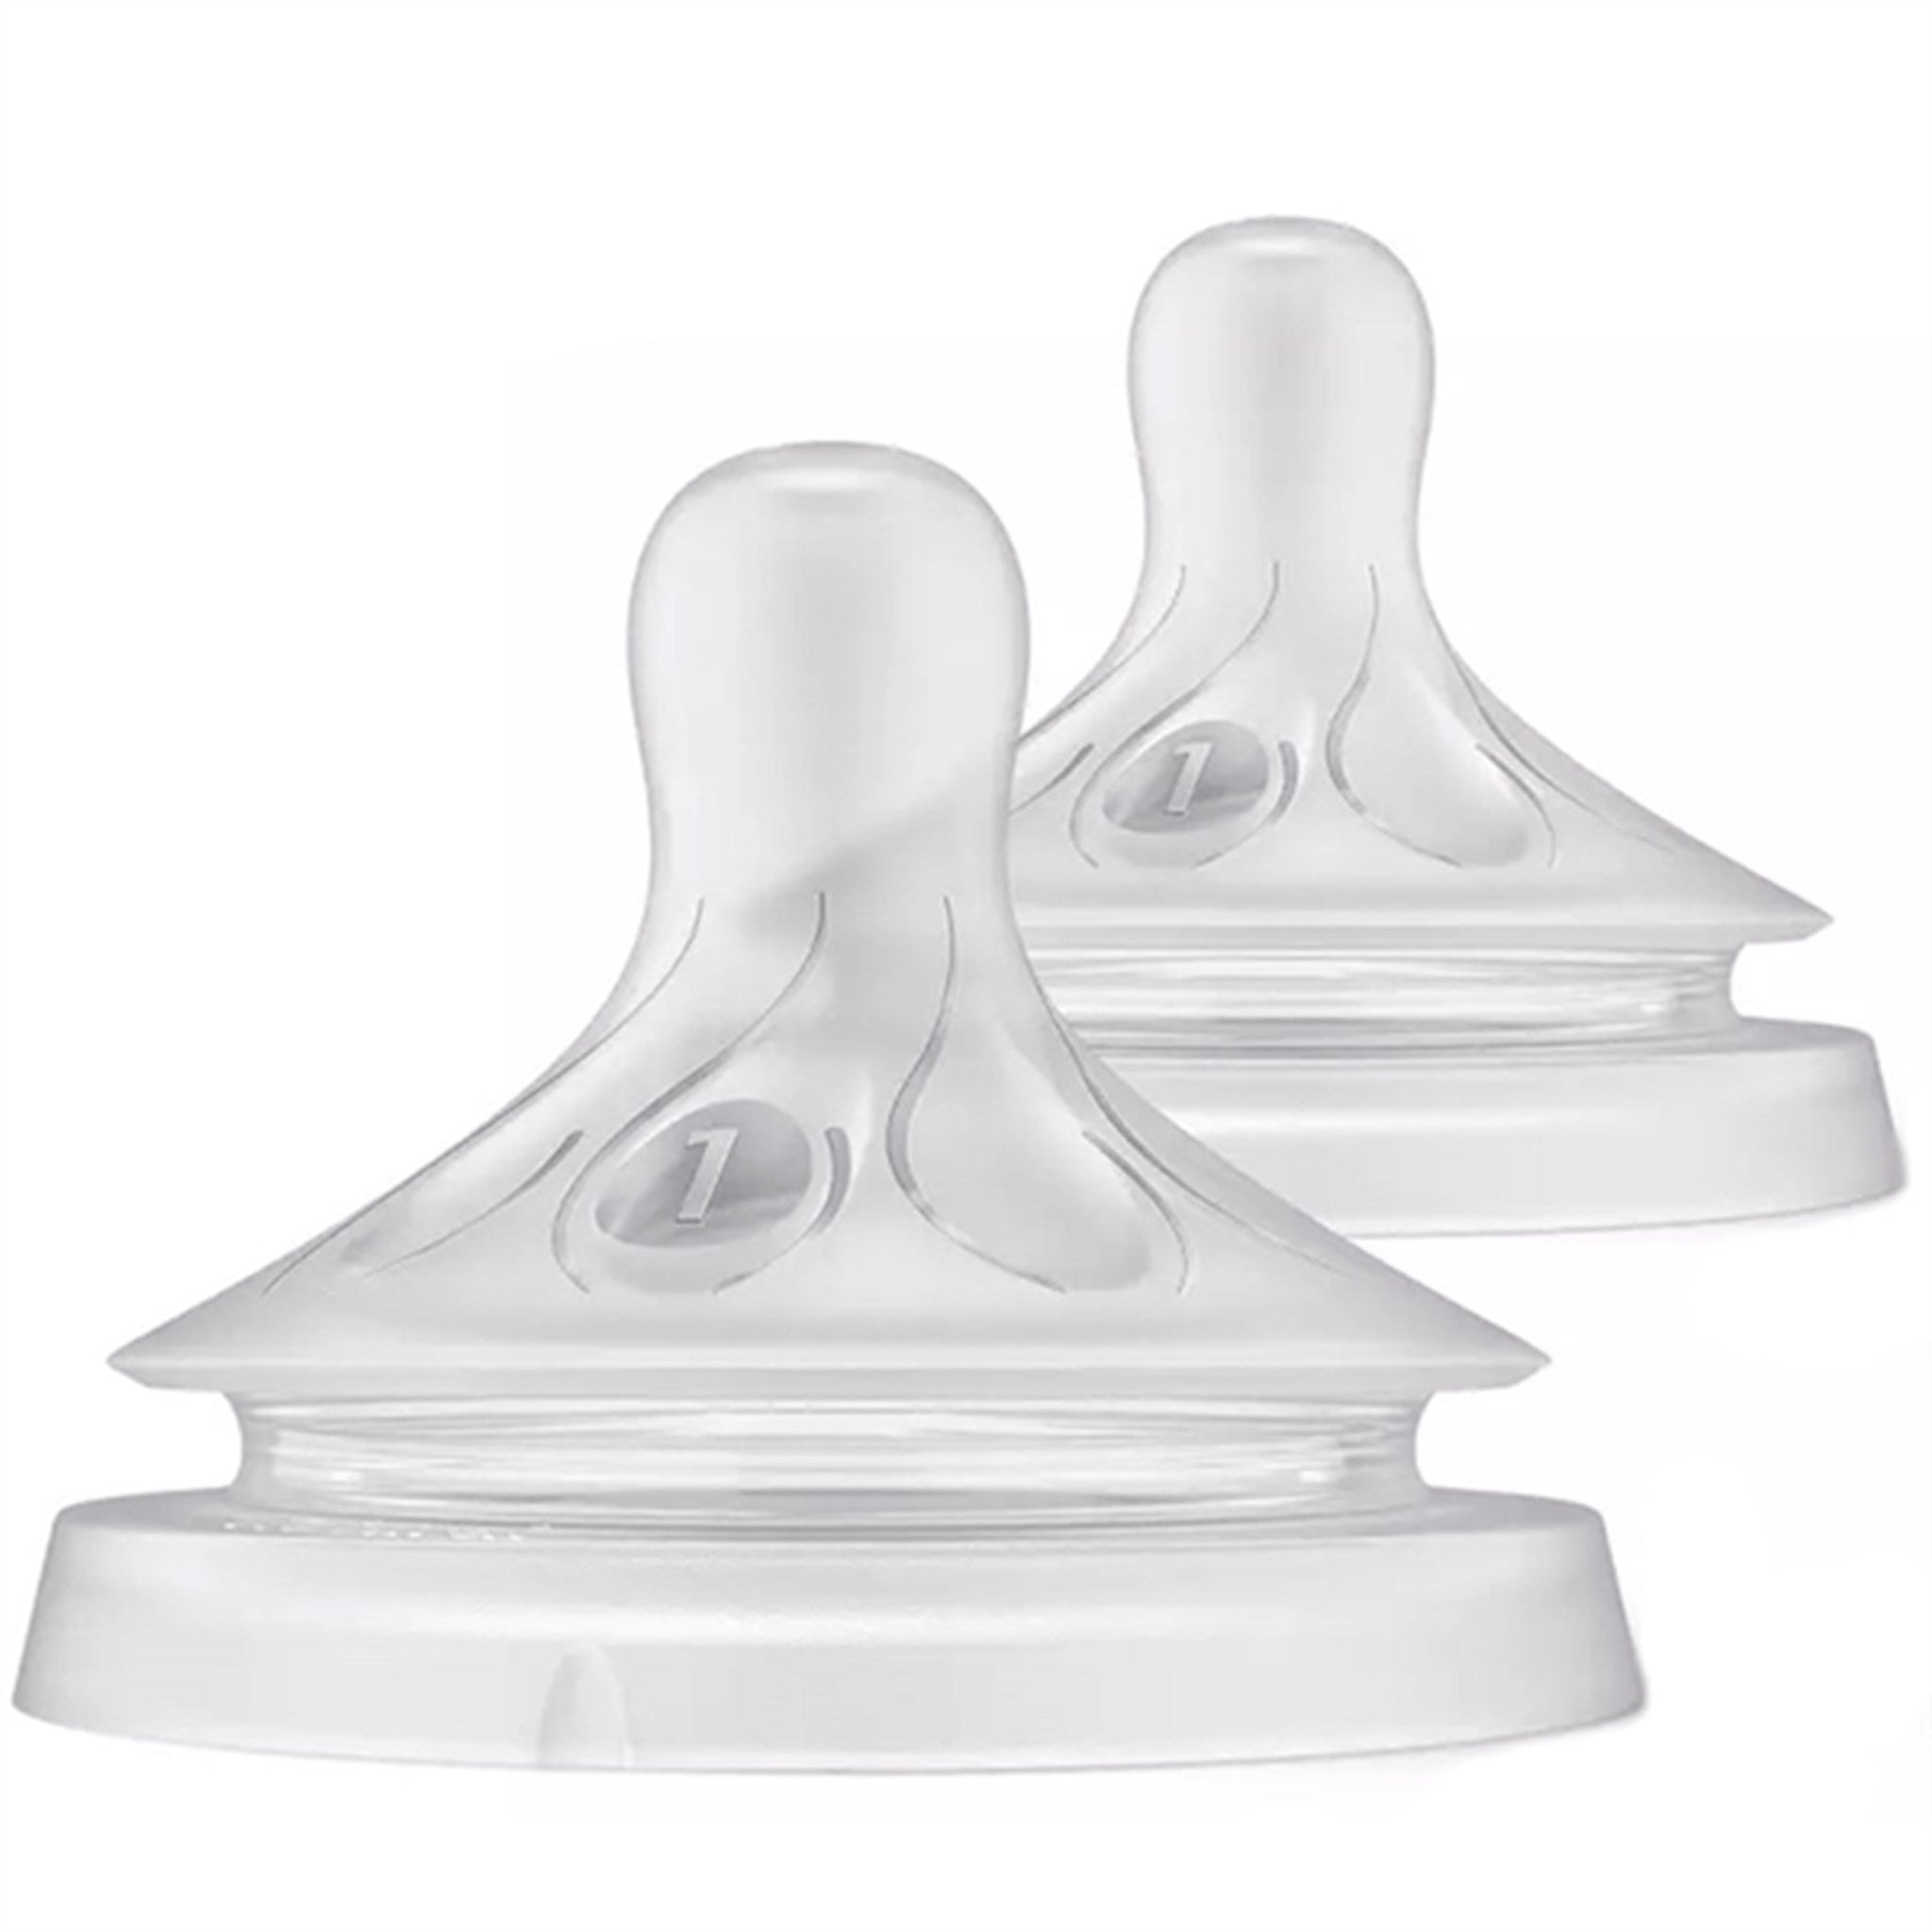 Philips Avent Natural Feeding Bottle Heads Response 0 months 2-pack